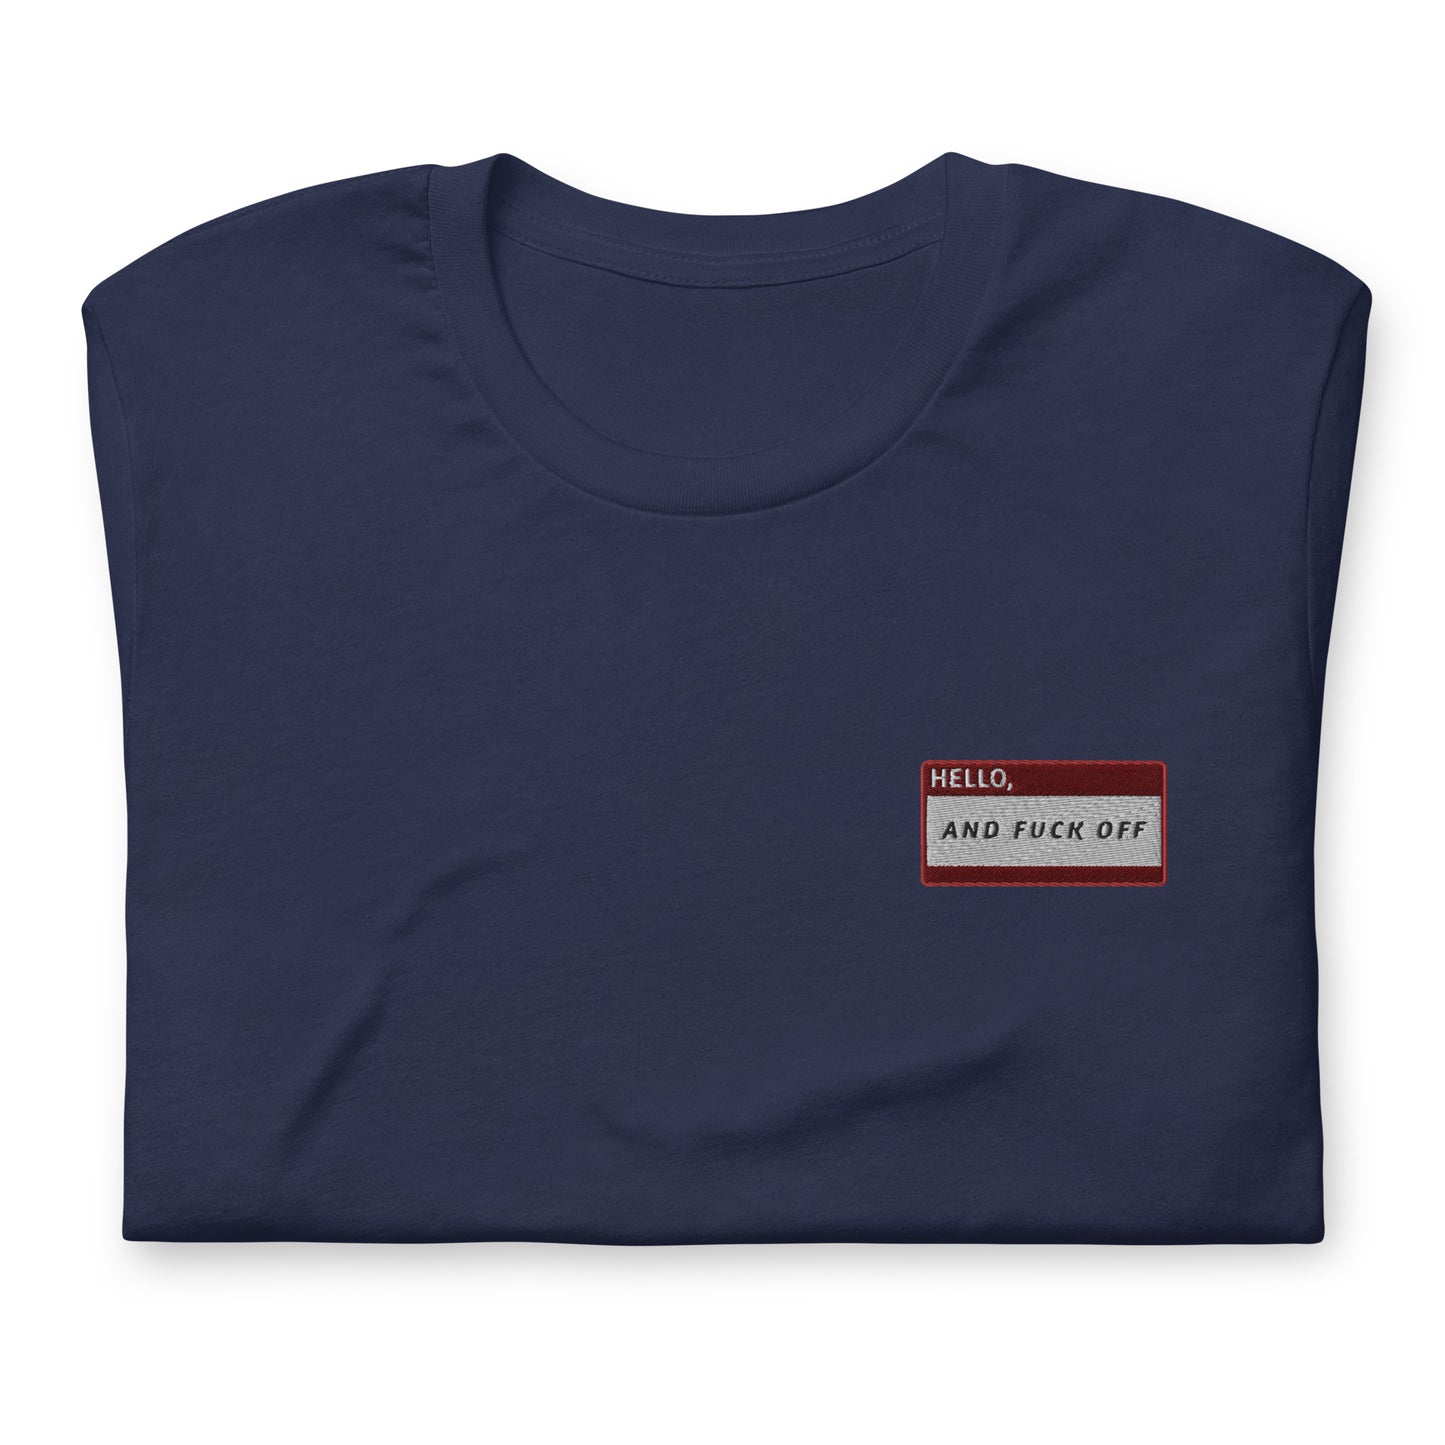 HELLO AND FUCK OFF - Name Tag T-Shirt